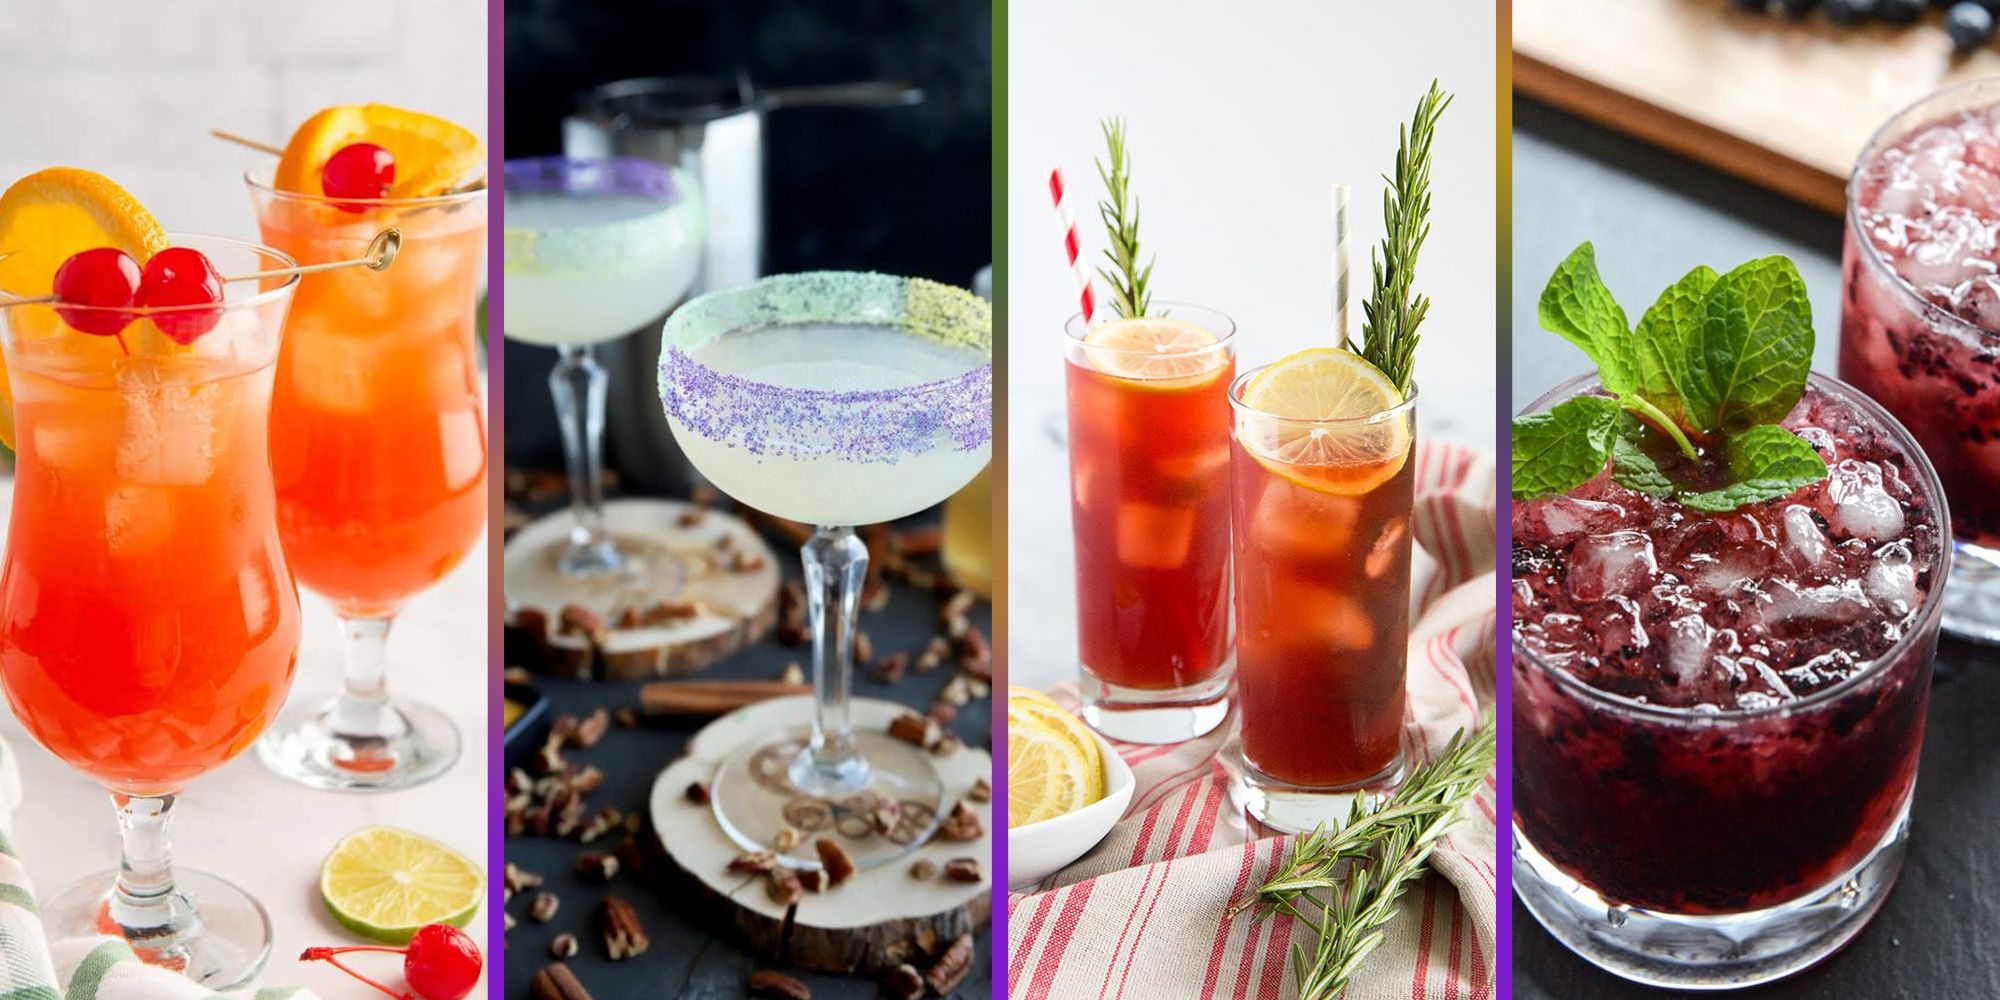 Mardi Gras kicks off in Brooklyn with these specialty cocktails